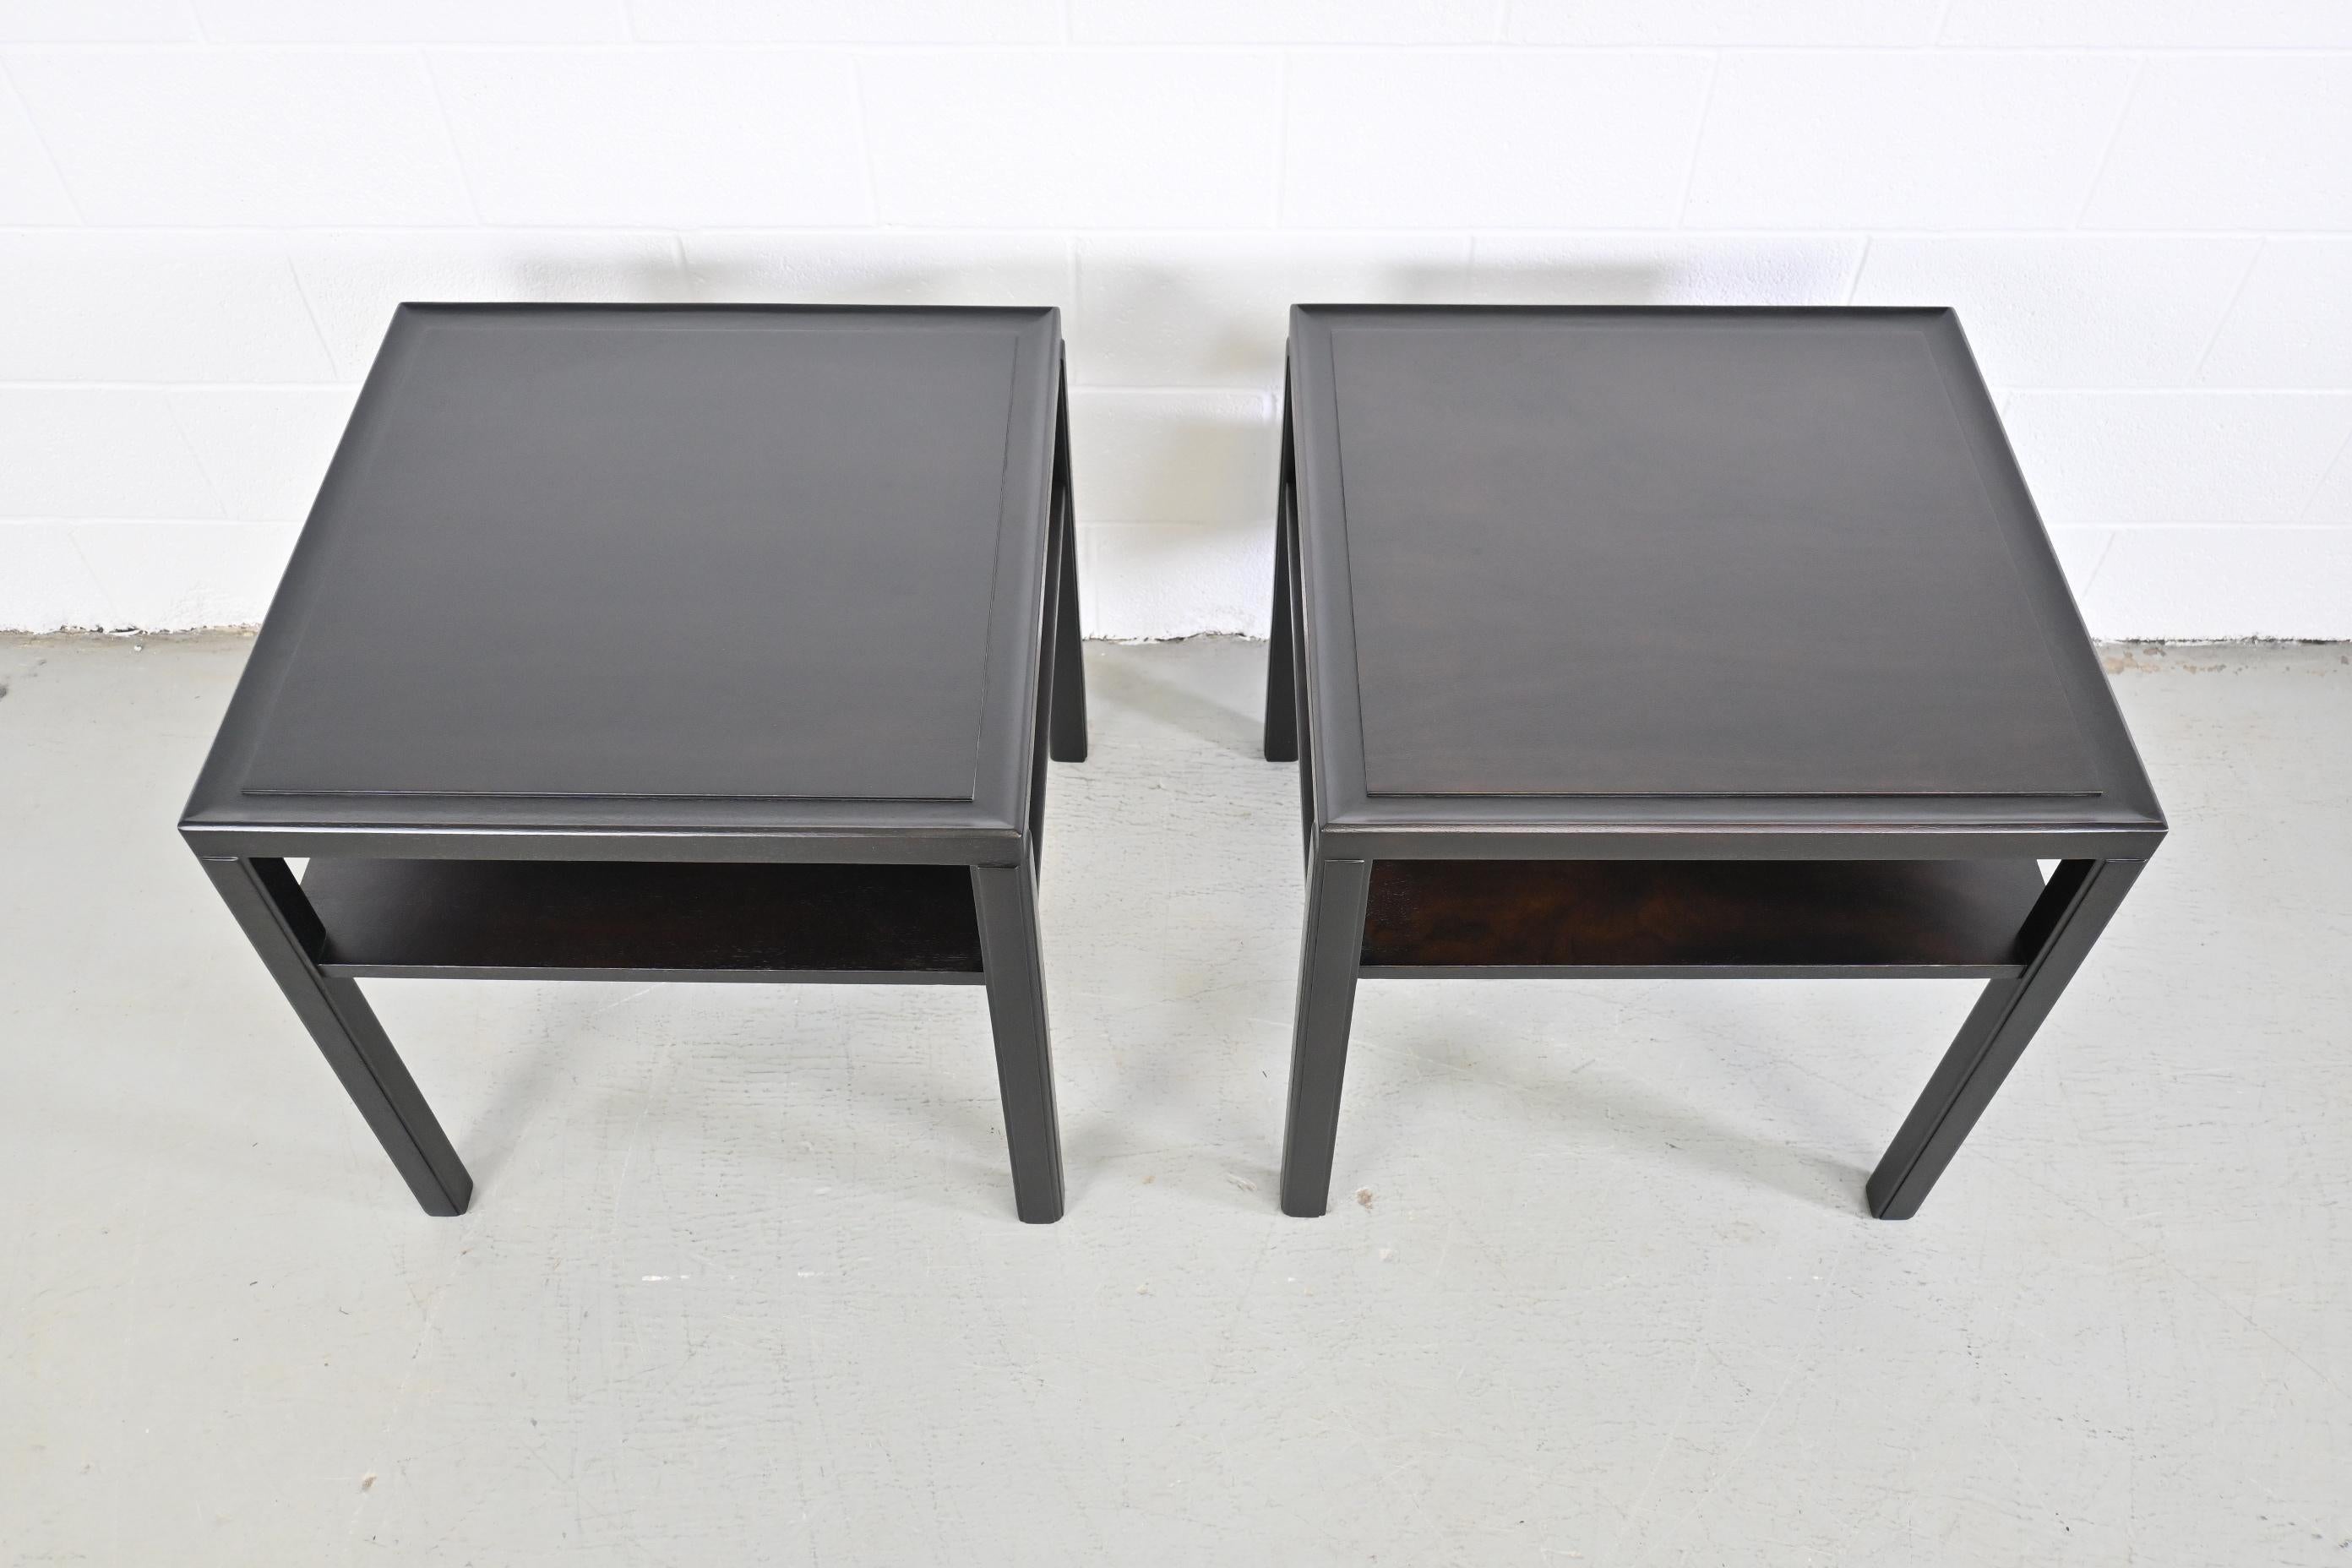 Mahogany Dunbar Furniture Ebonized Mid-Century Modern Two Tiered End Tables, a Pair